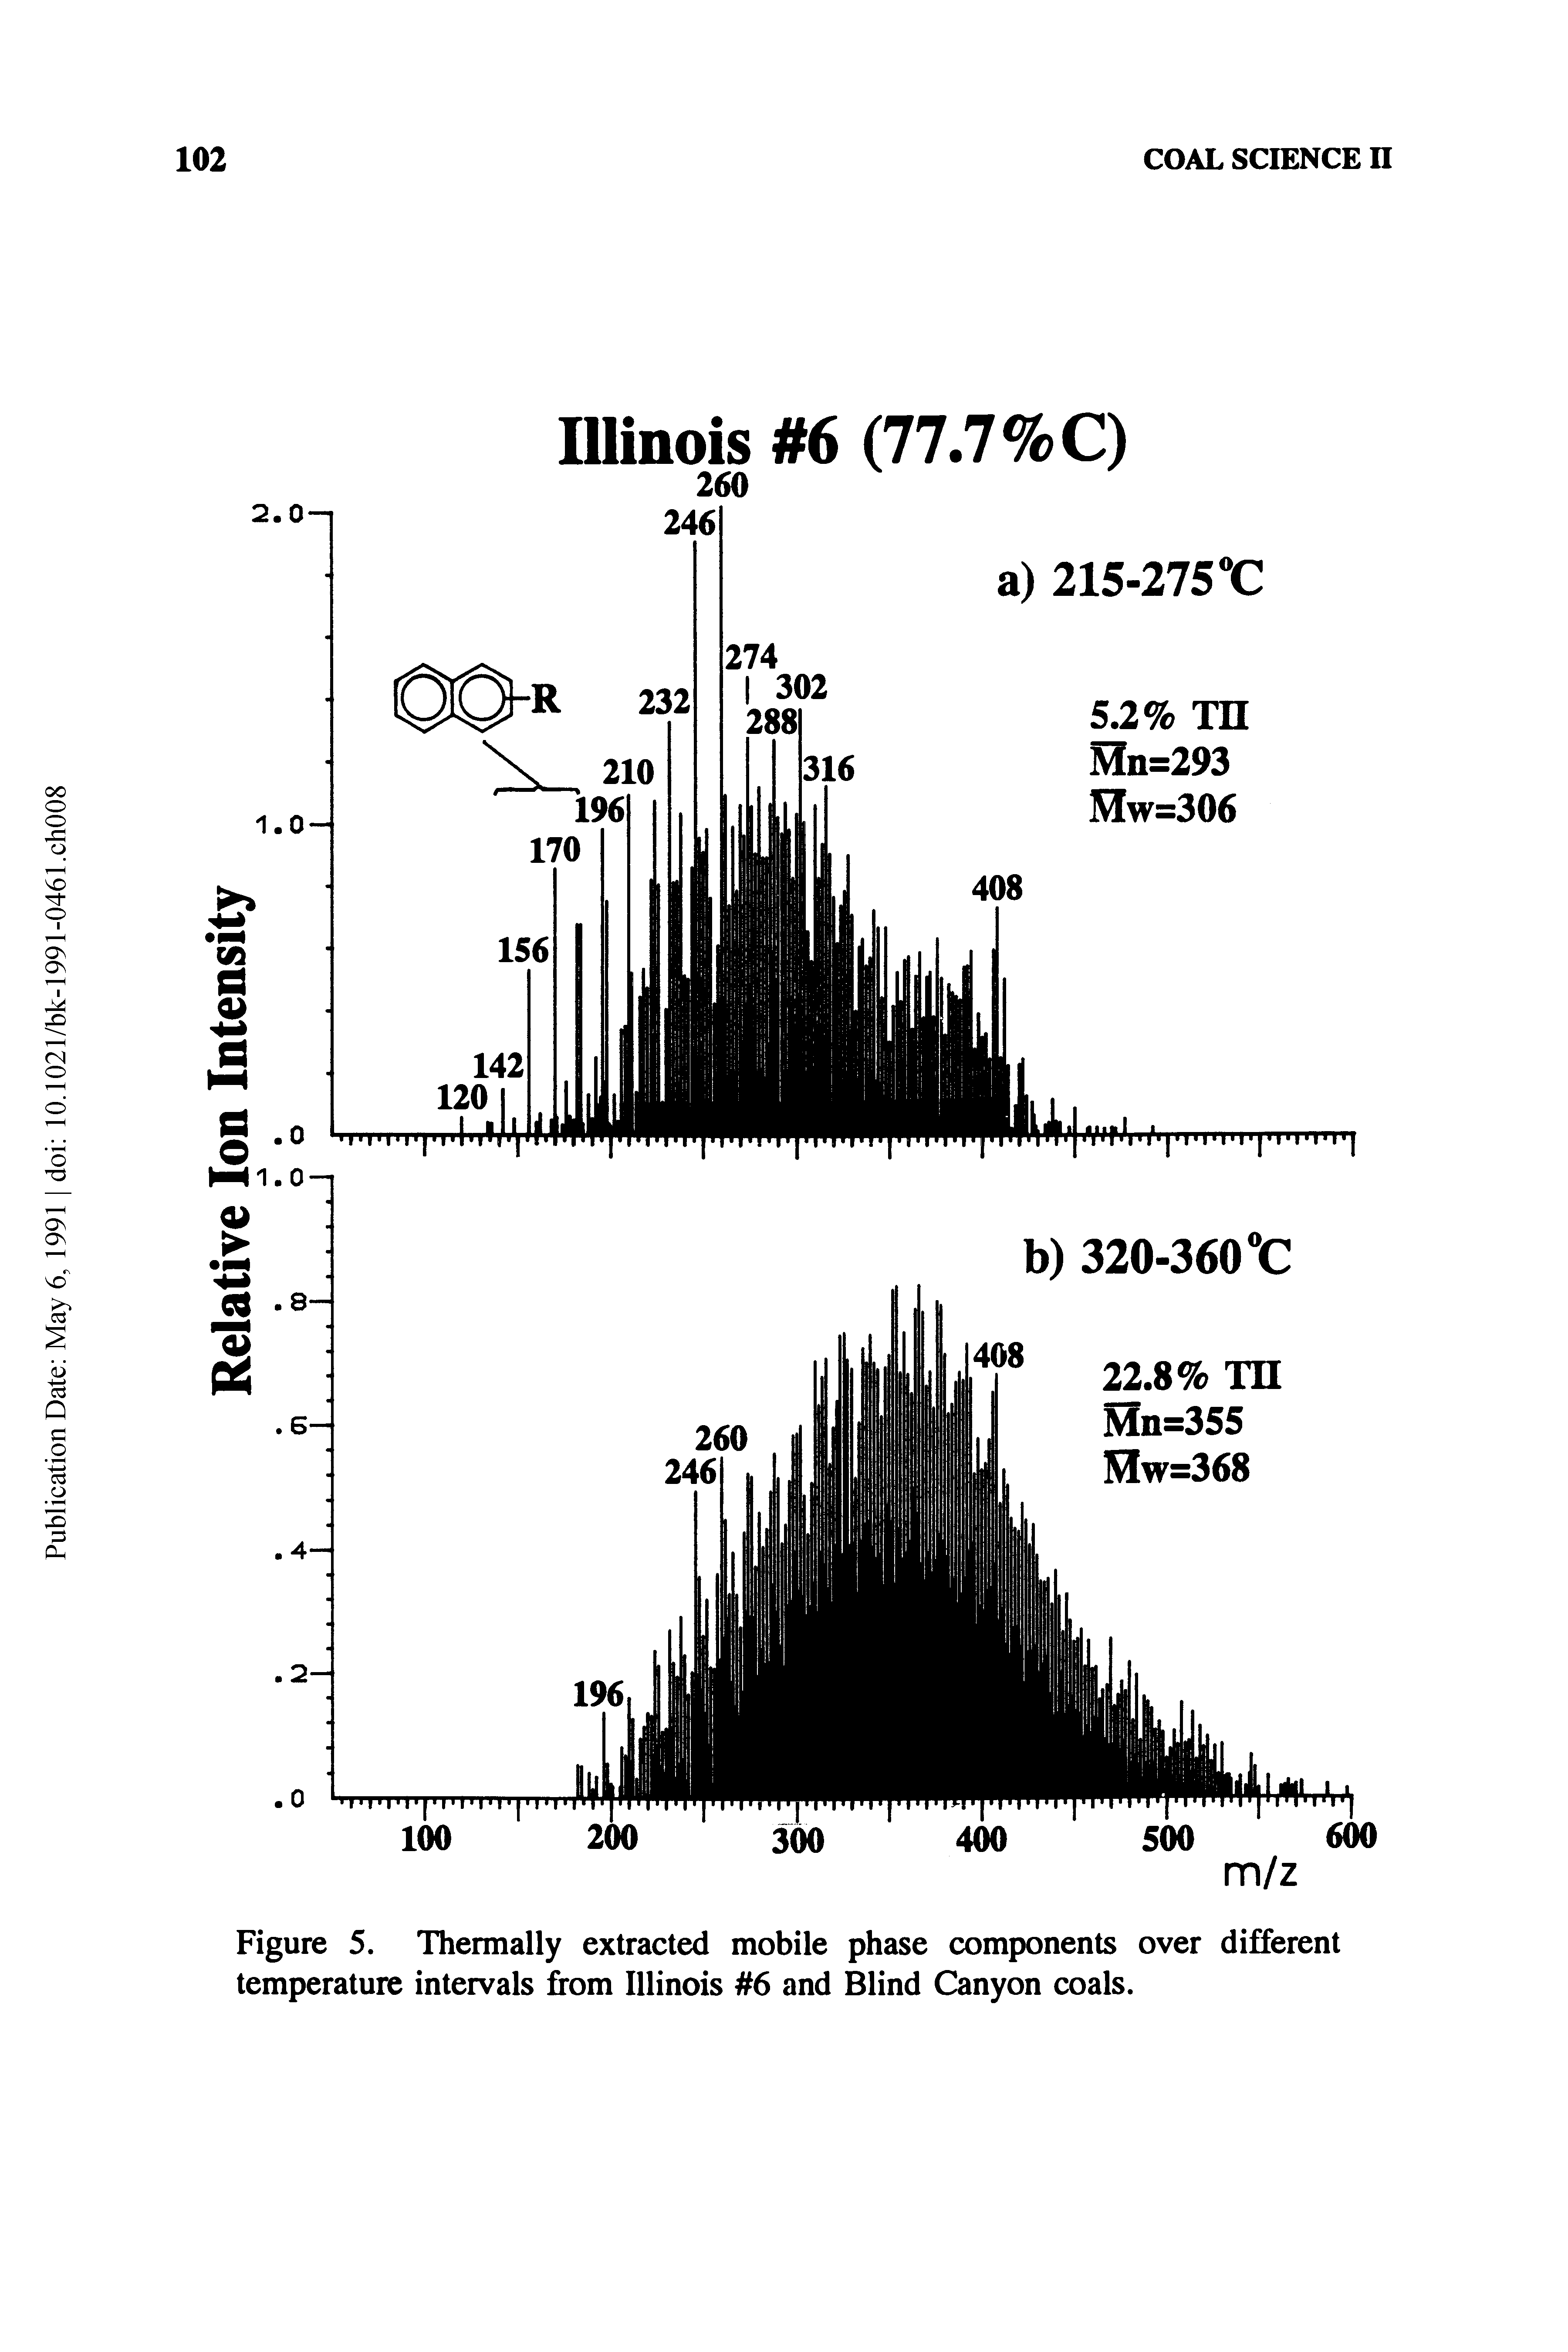 Figure 5. Thermally extracted mobile phase components over different temperature intervals from Illinois 6 and Blind Canyon coals.